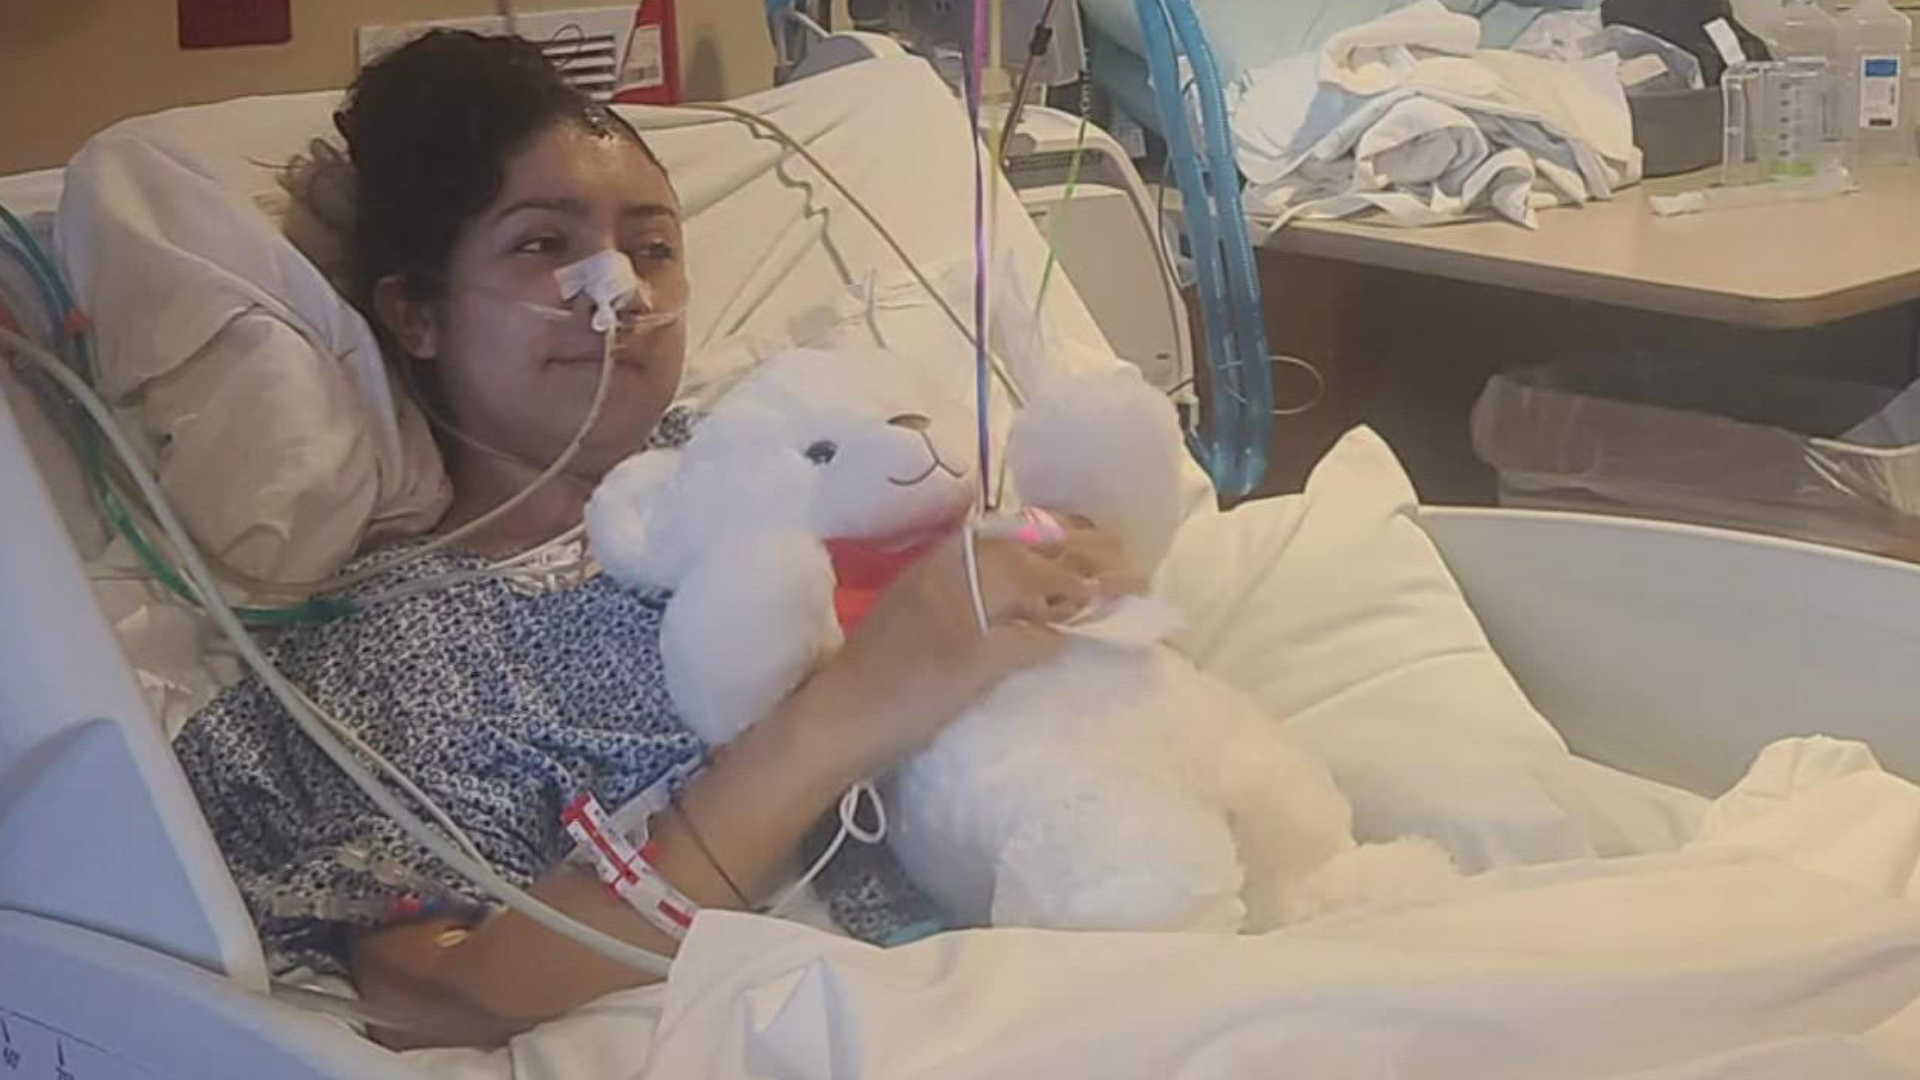 Kemery Ortega said her recovery gives her hope she can live a normal life again soon.